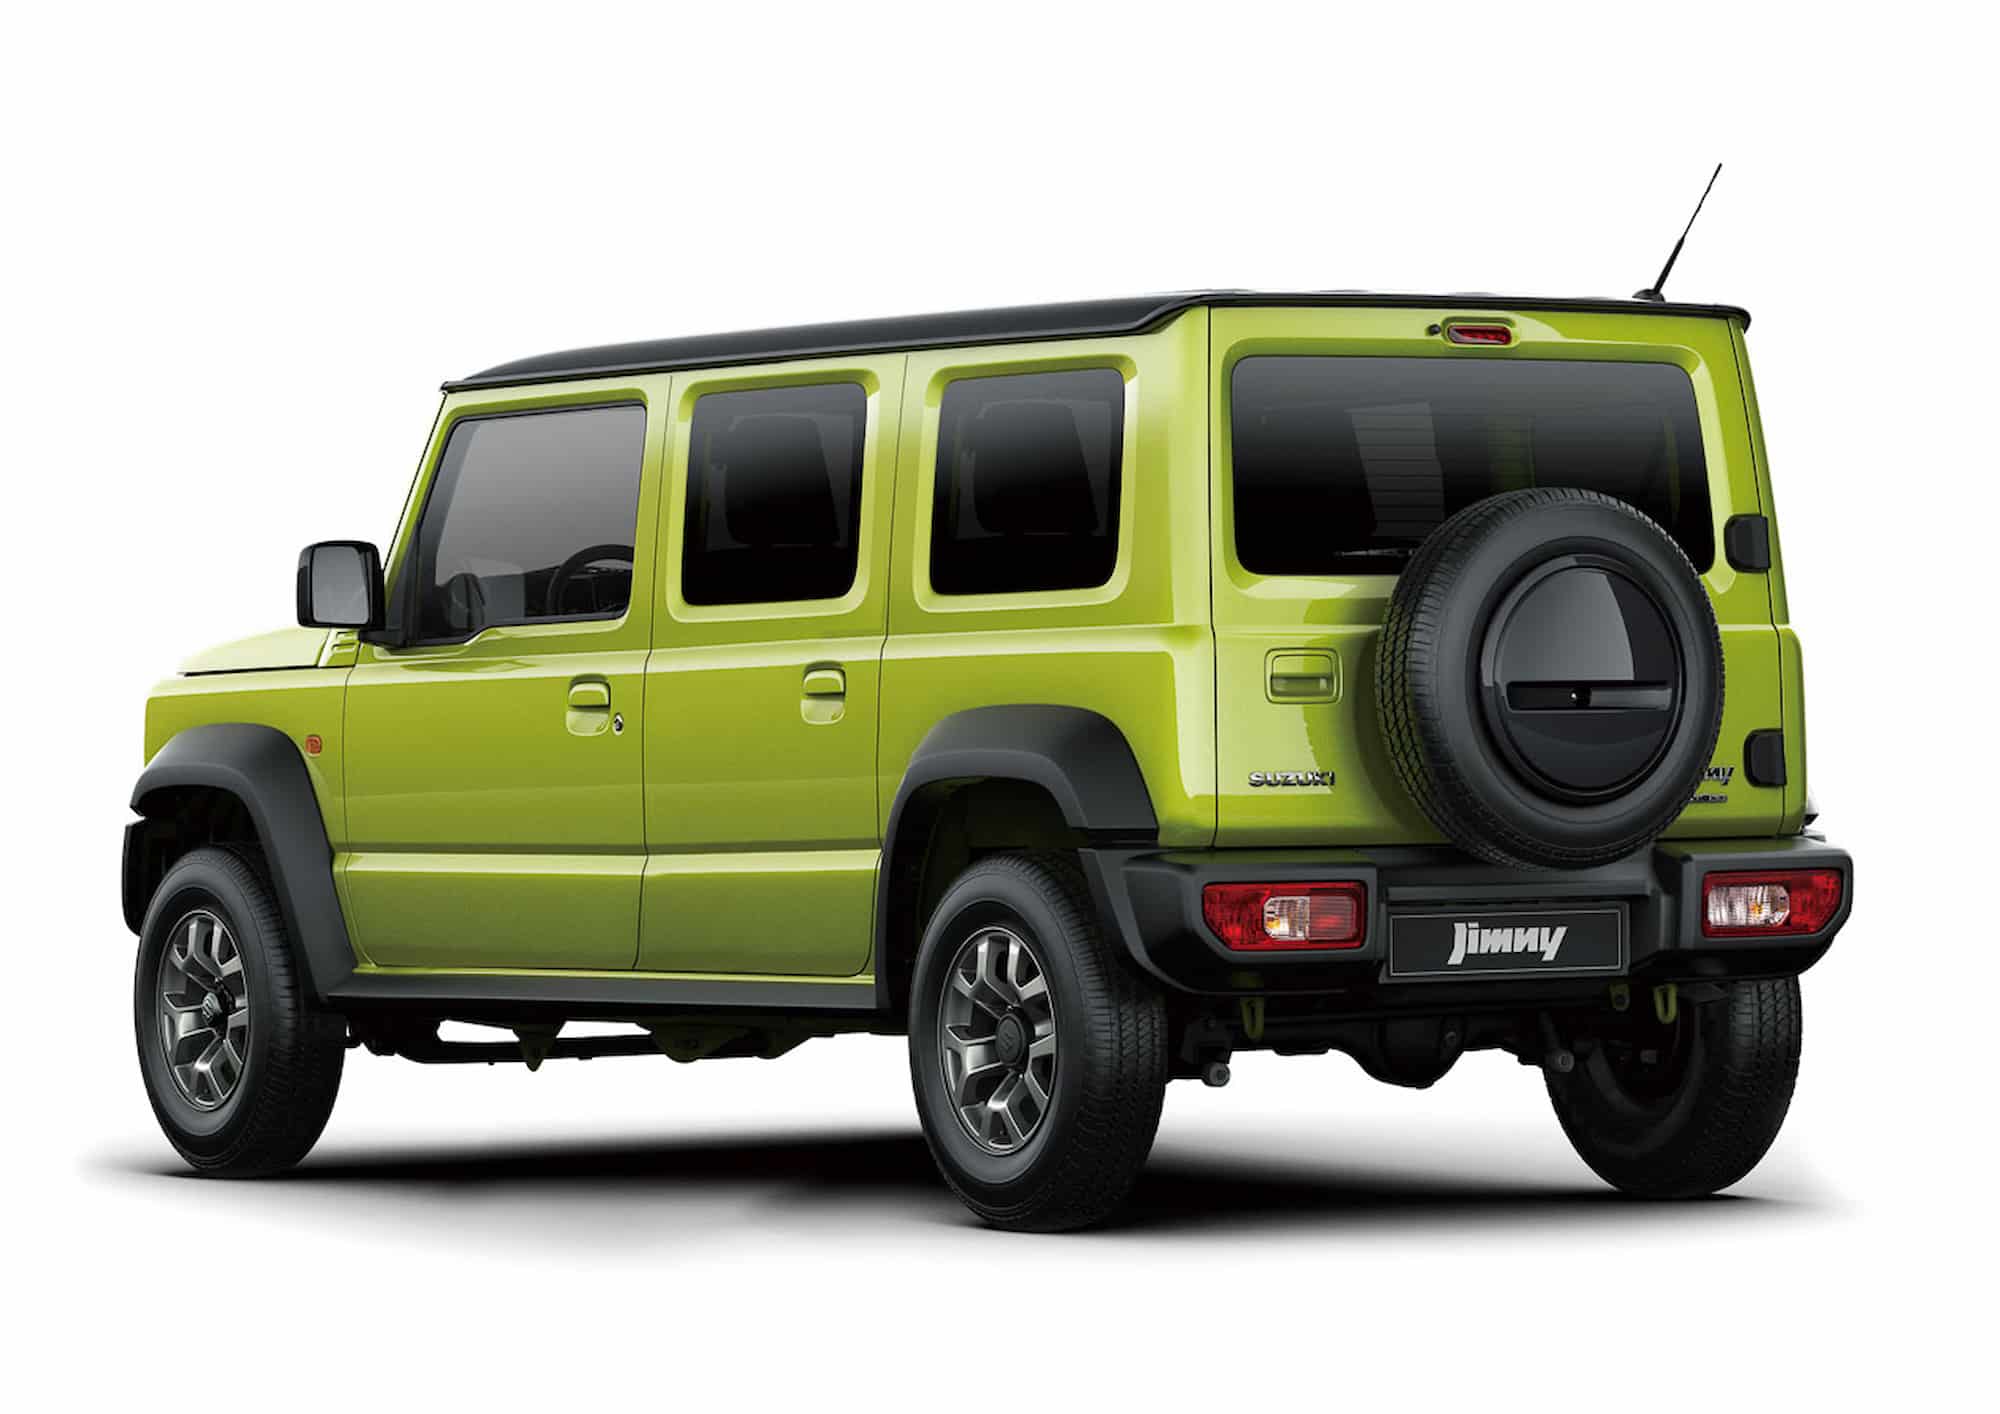 Suzuki Jimny Could Make its India Debut by Year end